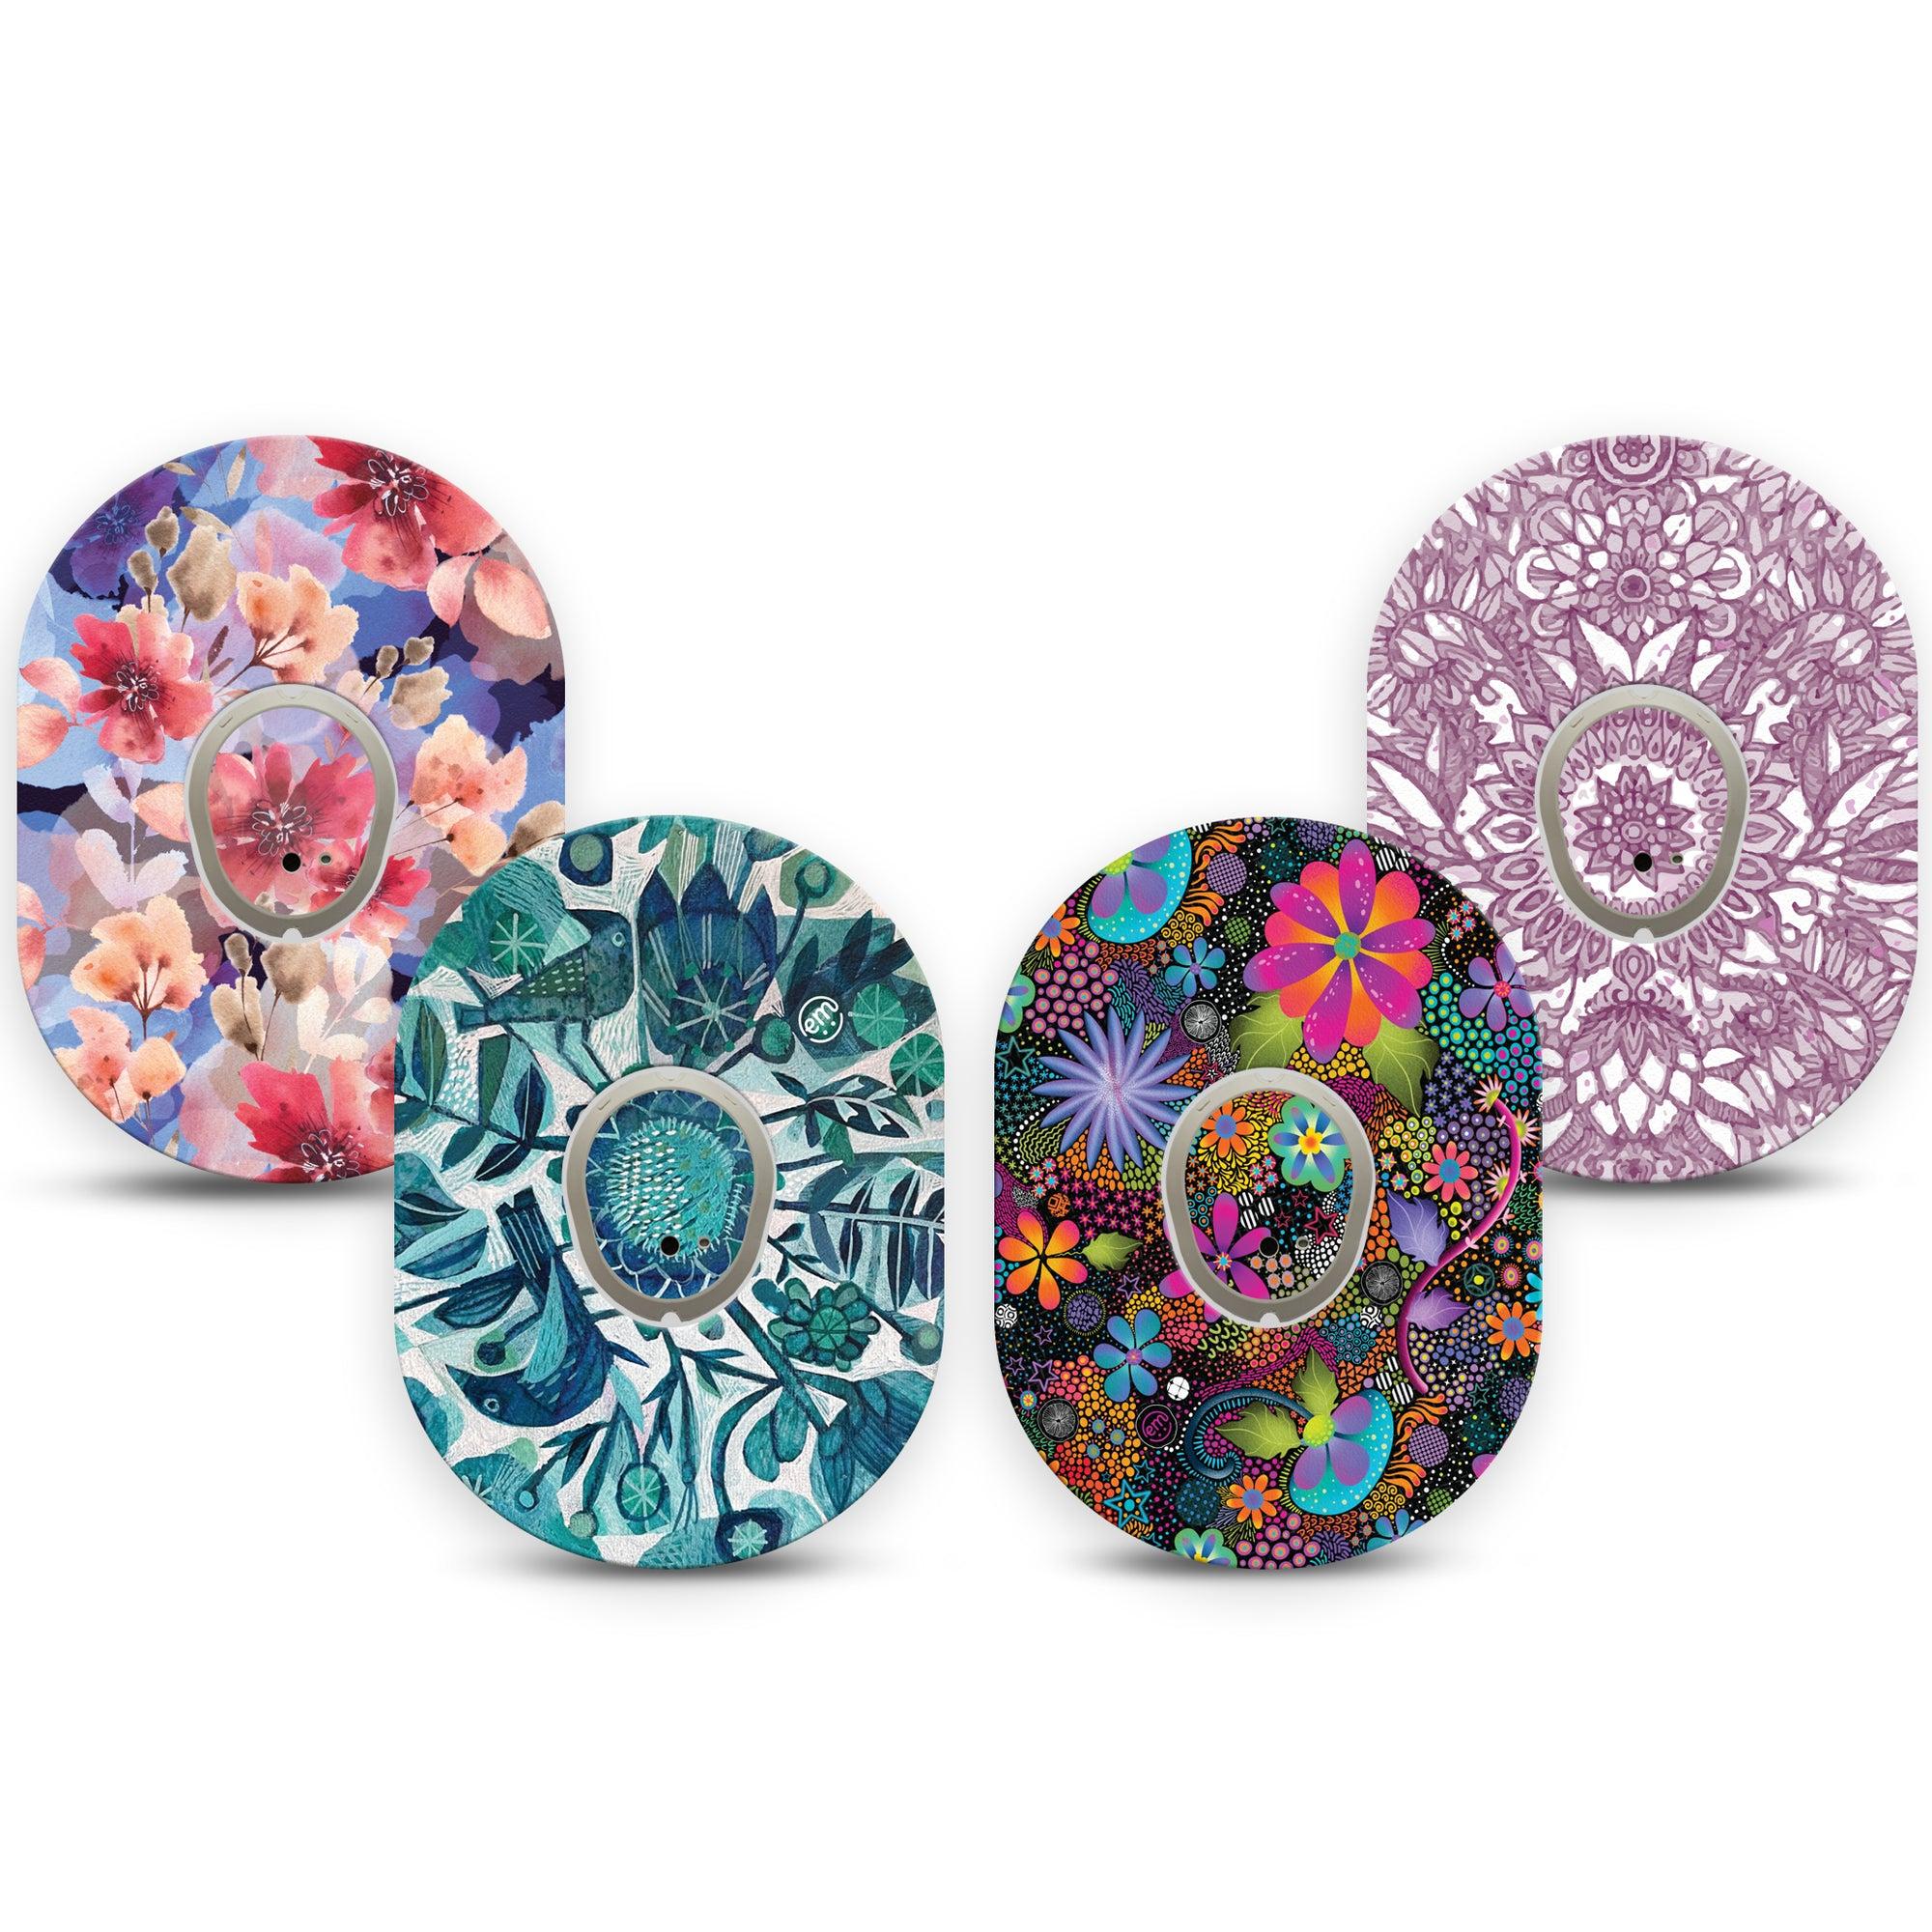 ExpressionMed Amazing Florals Mix Up Variety Pack Dexcom G7 Transmitter Sticker, 4-Pack, Colorful Florals Inspired, Dexcom G7 Transmitter Vinyl Sticker, With Matching Dexcom G7 Tape, CGM Plaster Patch Design